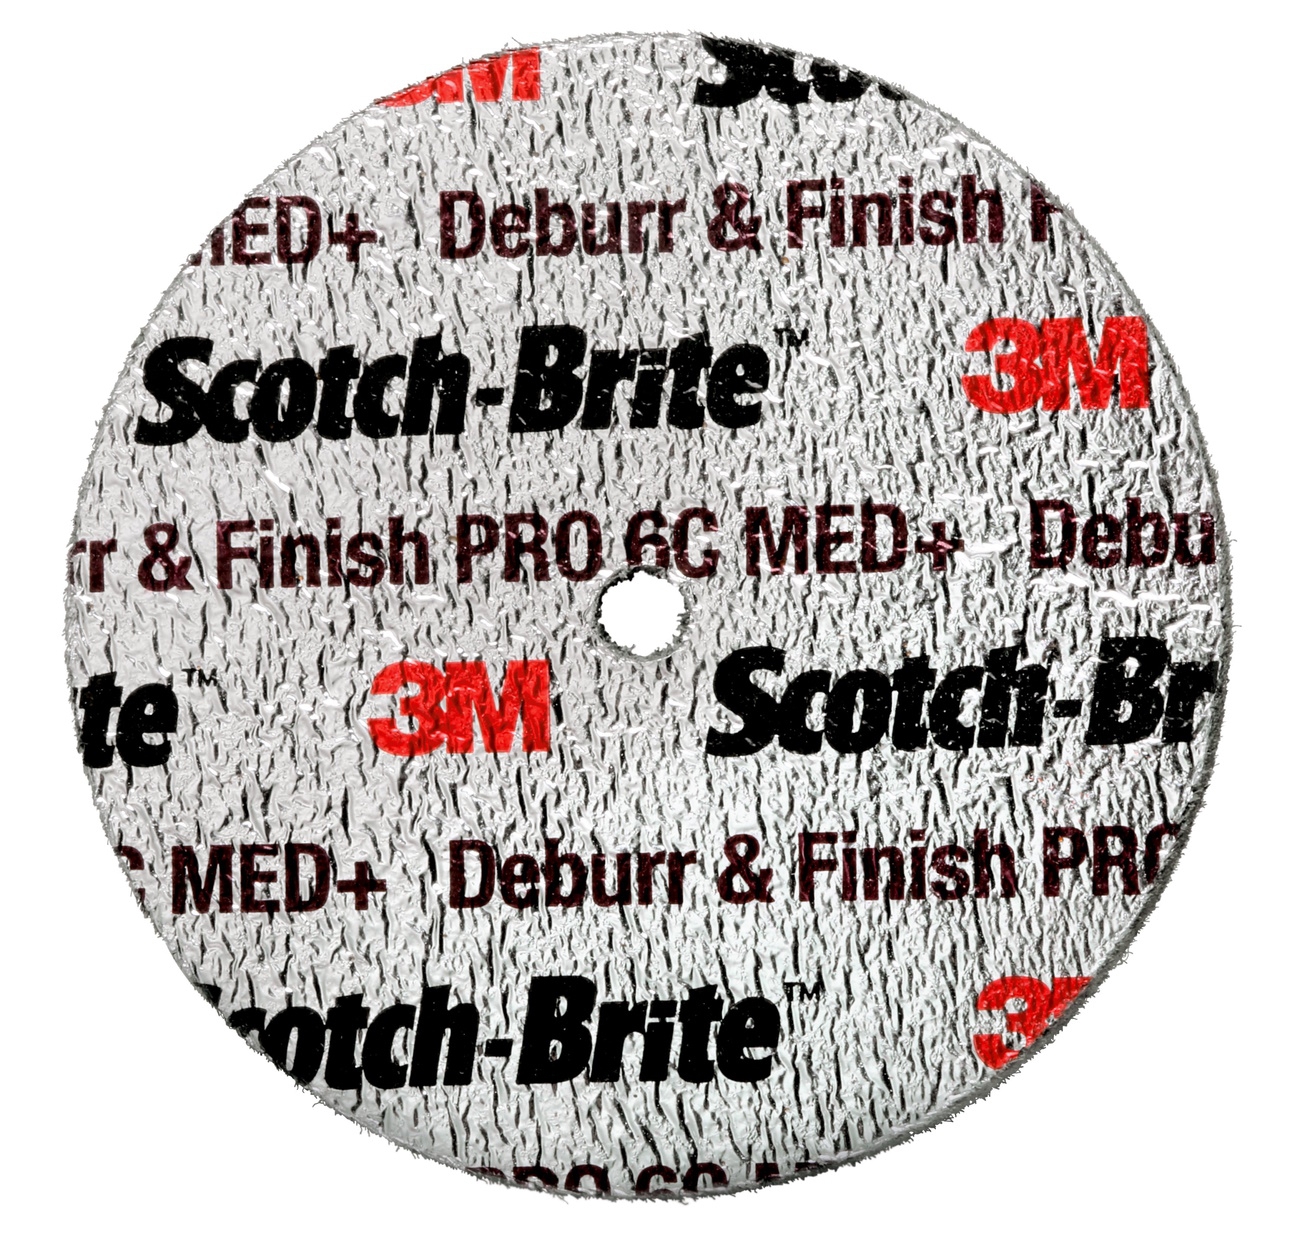 3M Scotch-Brite Deburr and Finish PRO compact disc DP-UW, 152 mm x 12.7 mm x 12.7 mm, 6C Med+, 4 WL